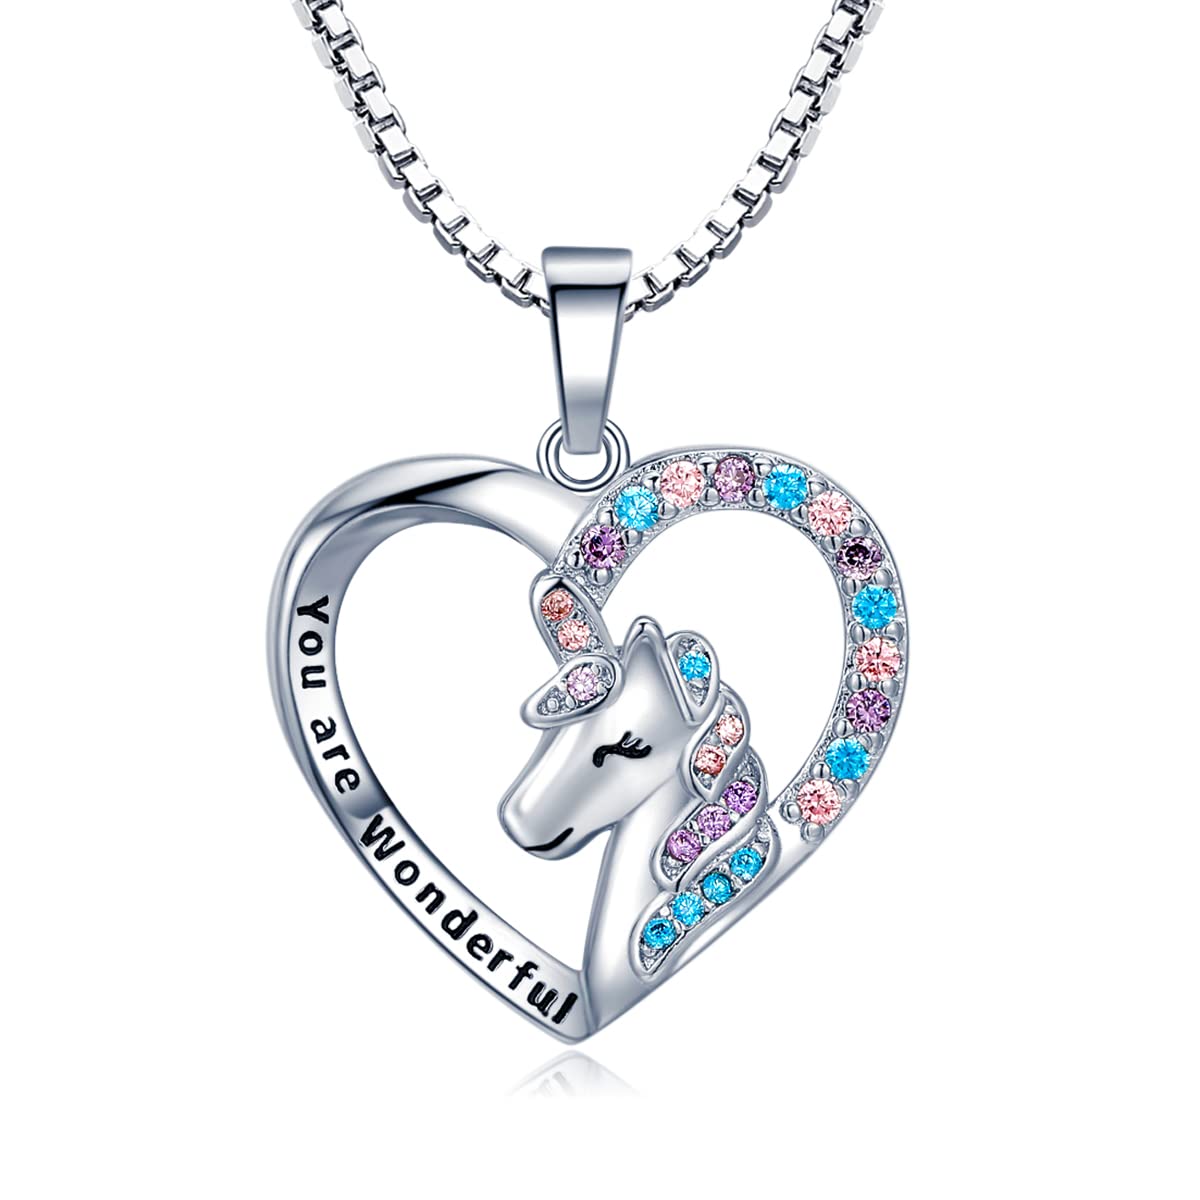 Unicorn Necklace for Girls Hypoallergenic Heart Pendant Necklace Unicorn Gift Christmas Birthday Jewelry Gift for Daughter Granddaughter Niece